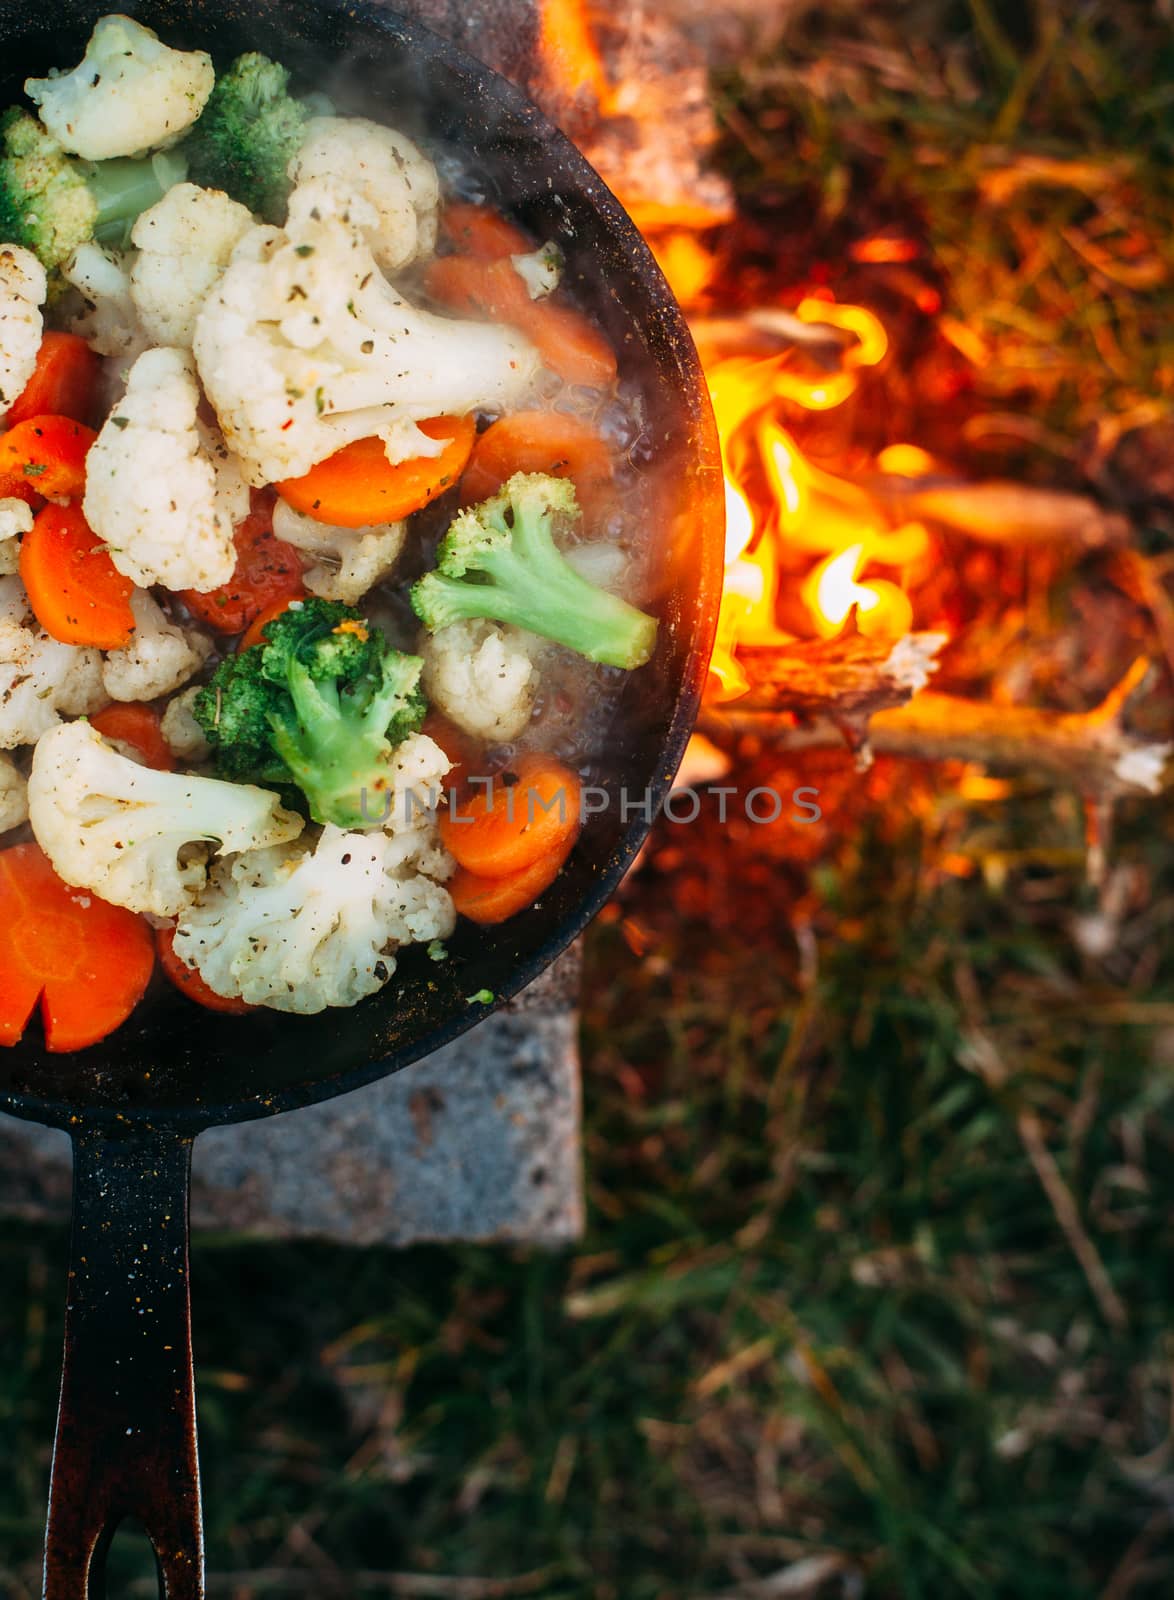 Cauliflower, broccoli and carrot in a pan. Cooking on an open fi by Opikanets